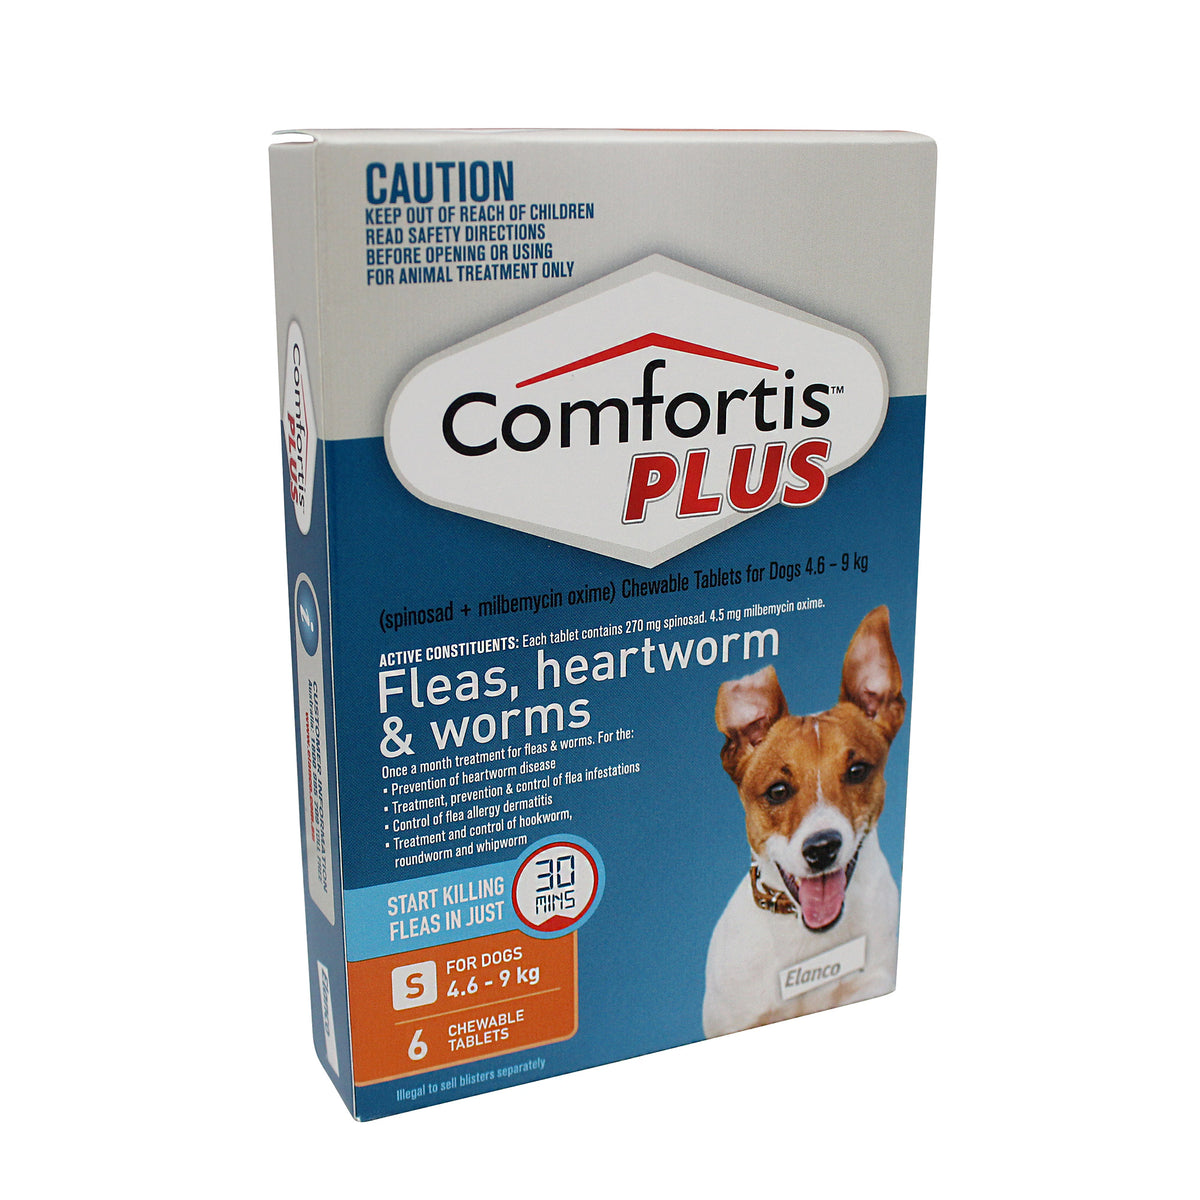 Comfortis PLUS for Small Dogs 4.6 to 9kg